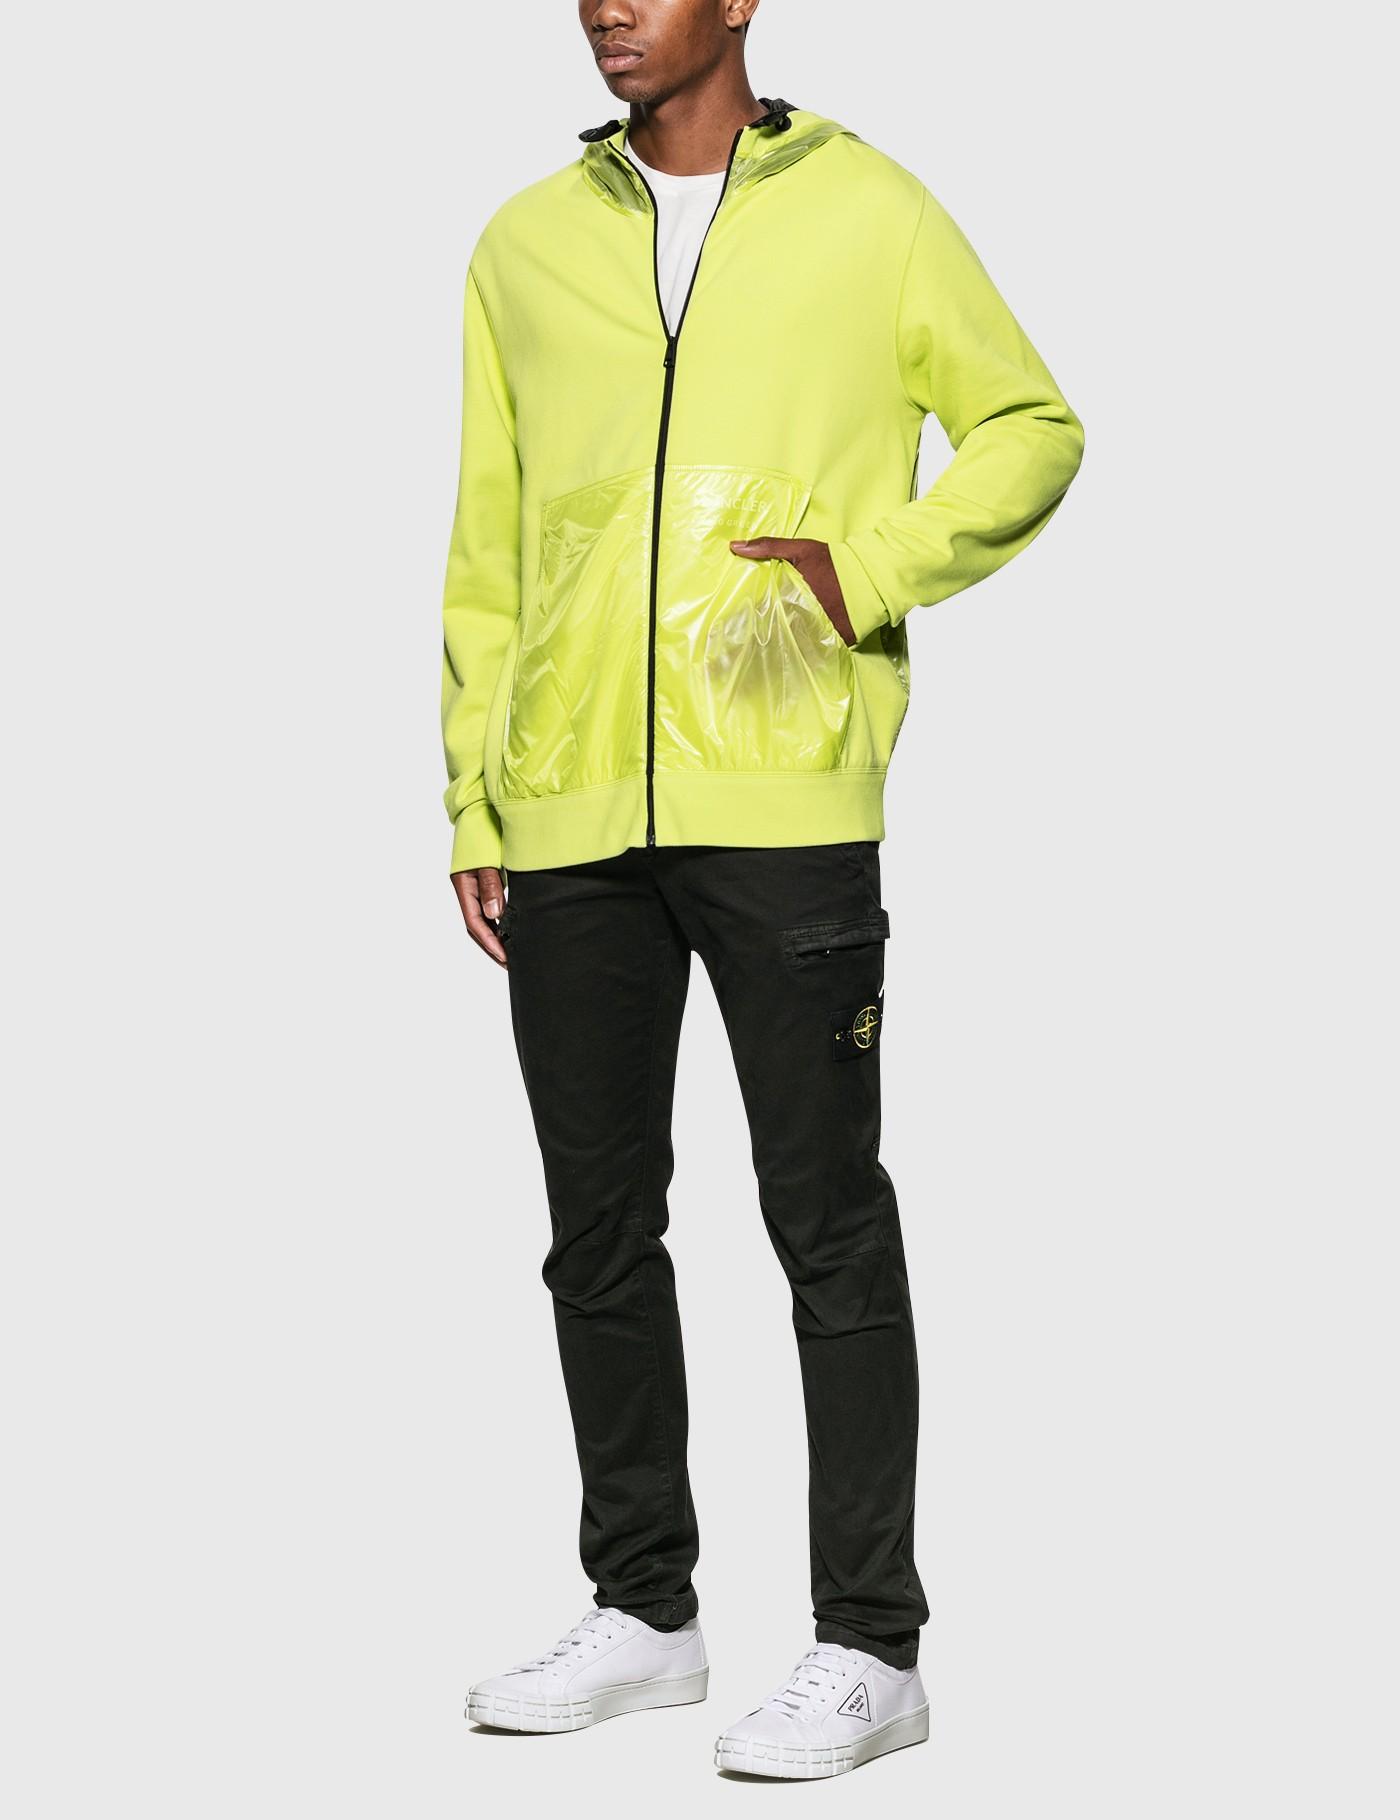 Moncler Genius Cotton X Craig Green Hooded Cardigan in Yellow for Men ...